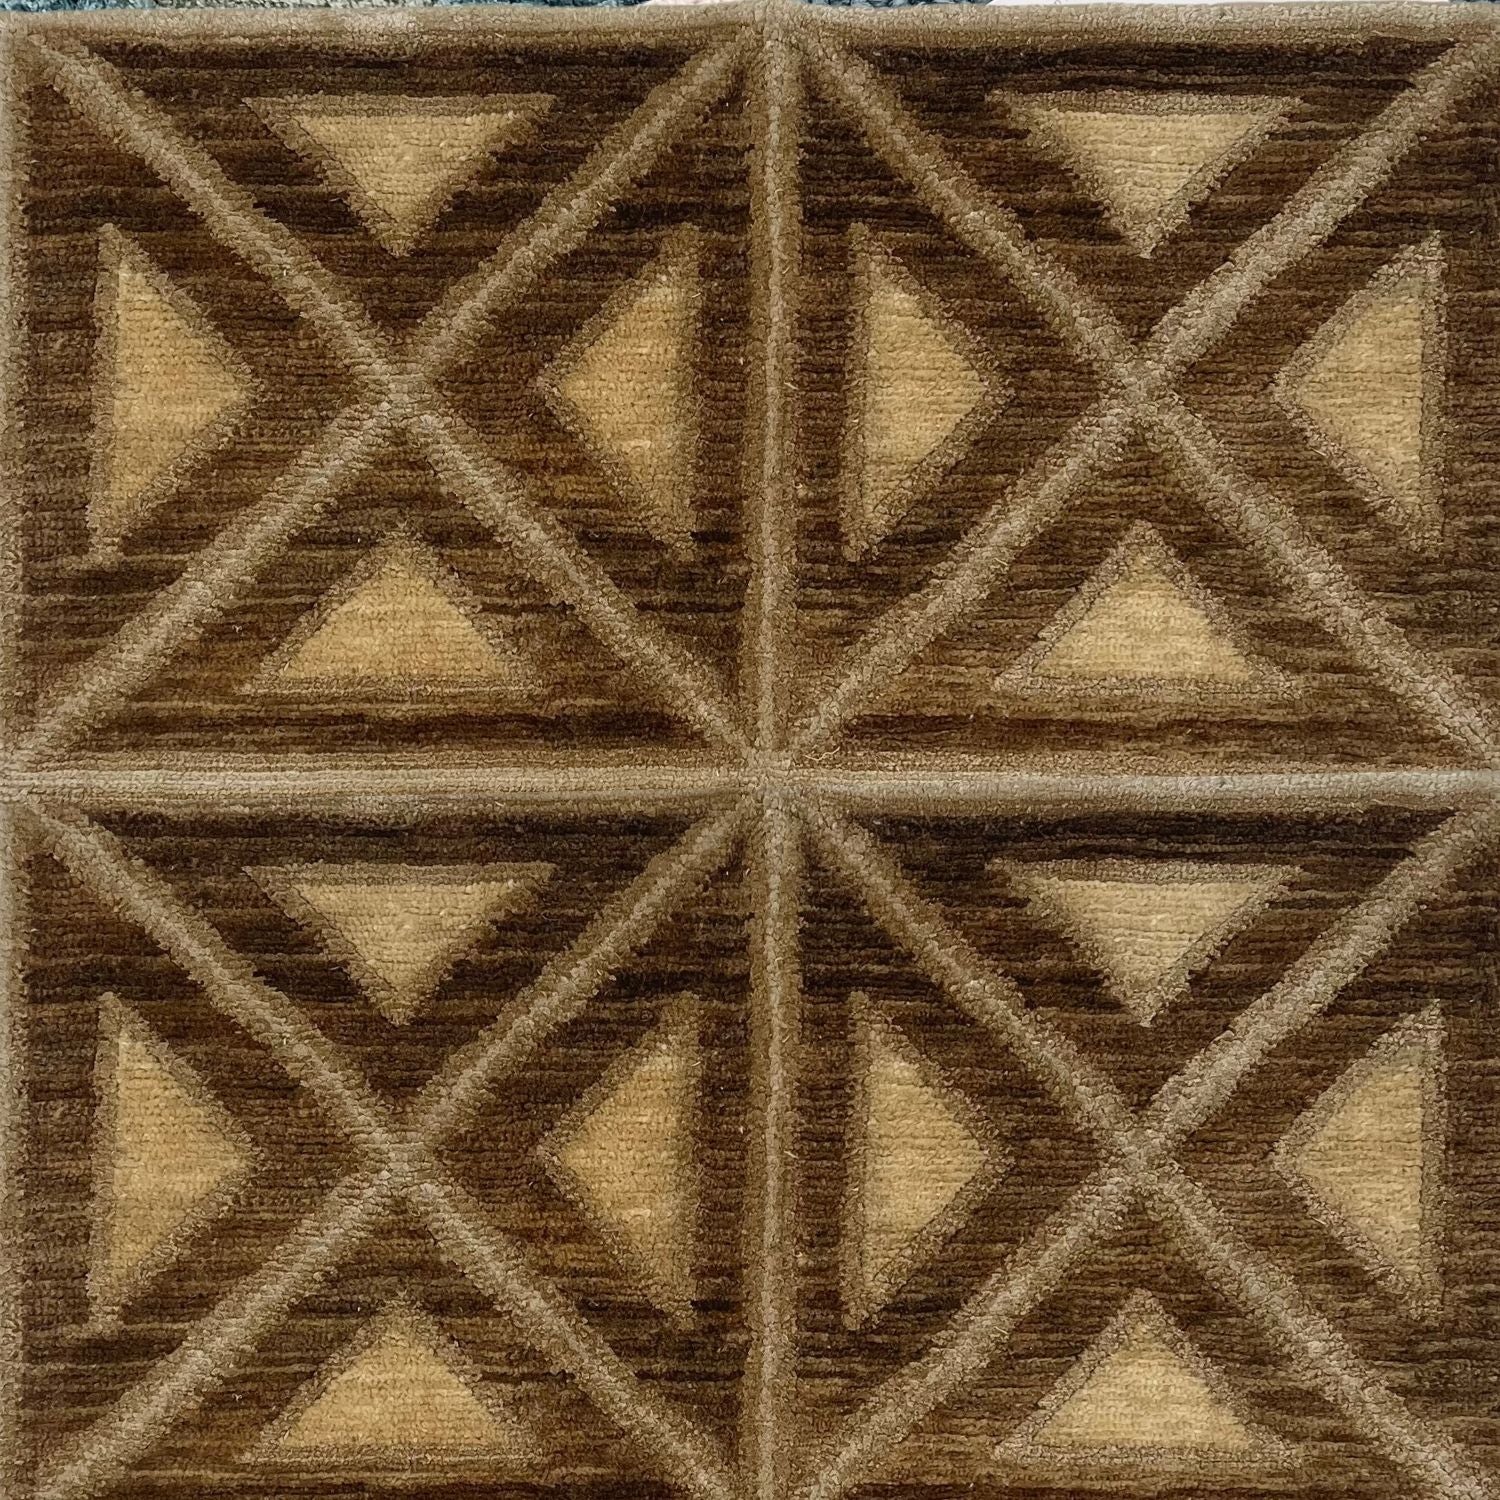 A rug woven in a repeating diamond and square pattern in brown, tan and beige.